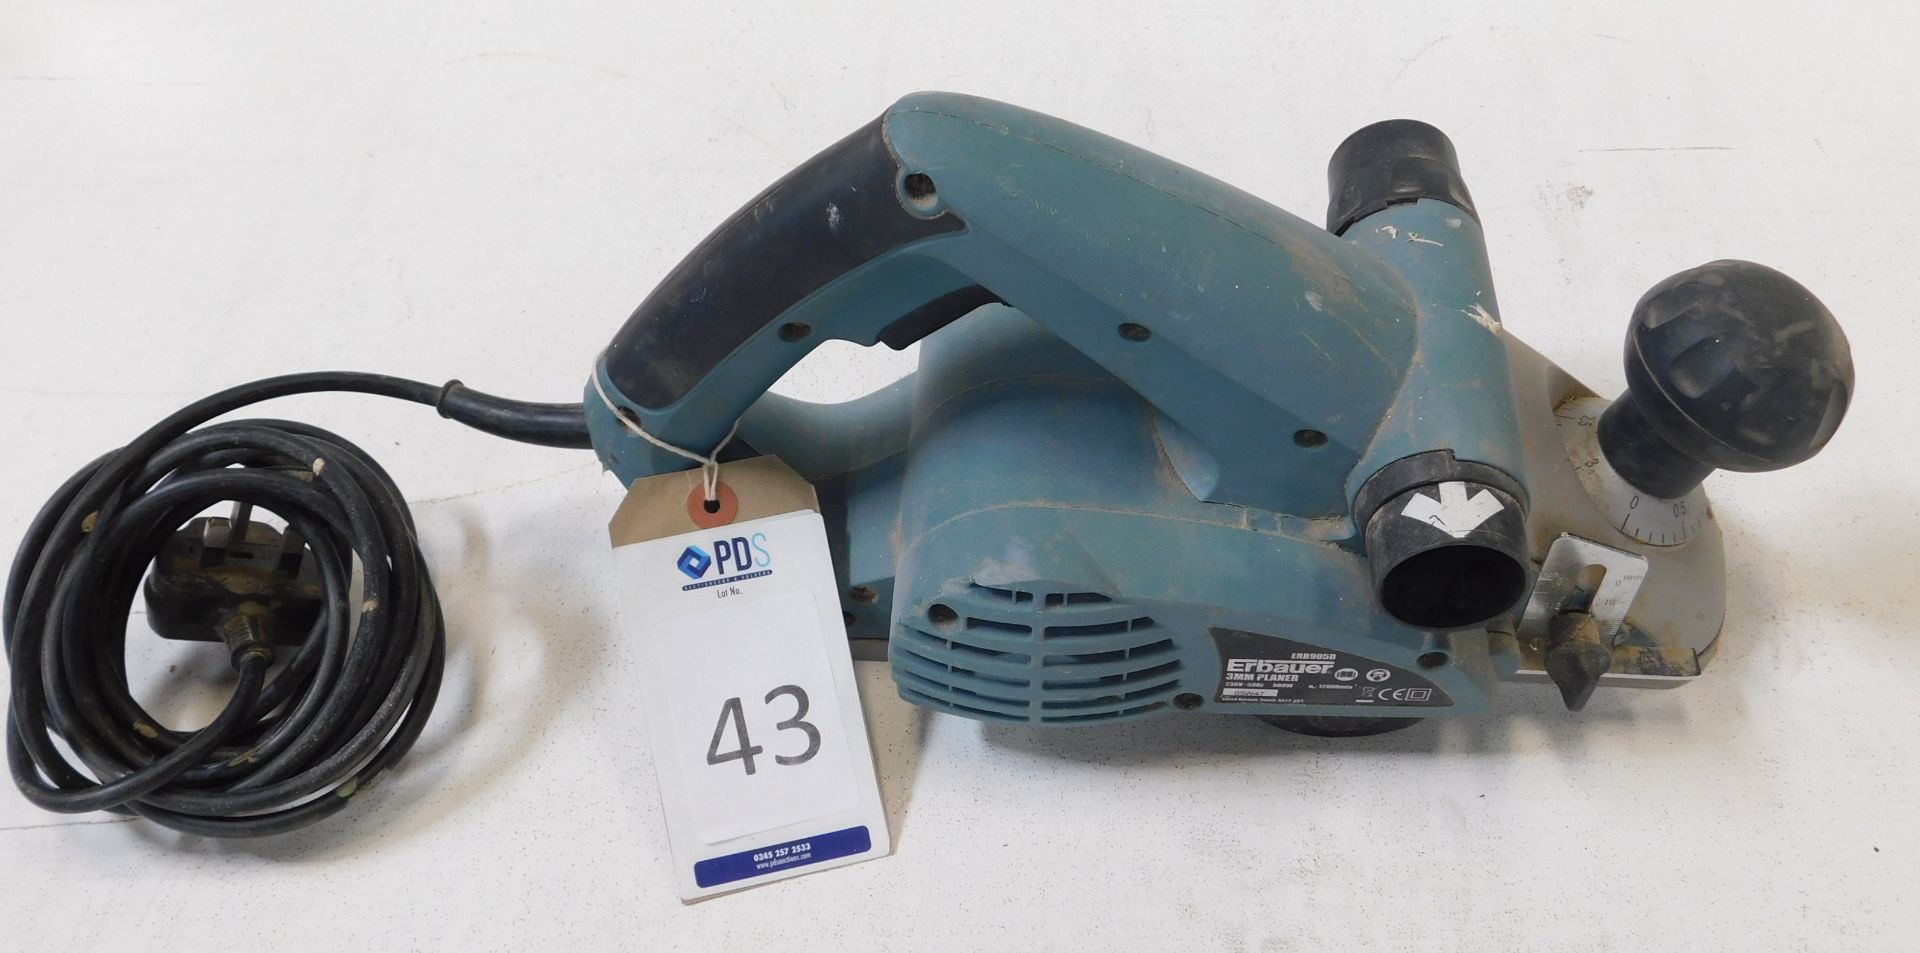 Erbauer ERB905D Portable Planer 240v (Location: Brentwood: Please Refer to General Notes)